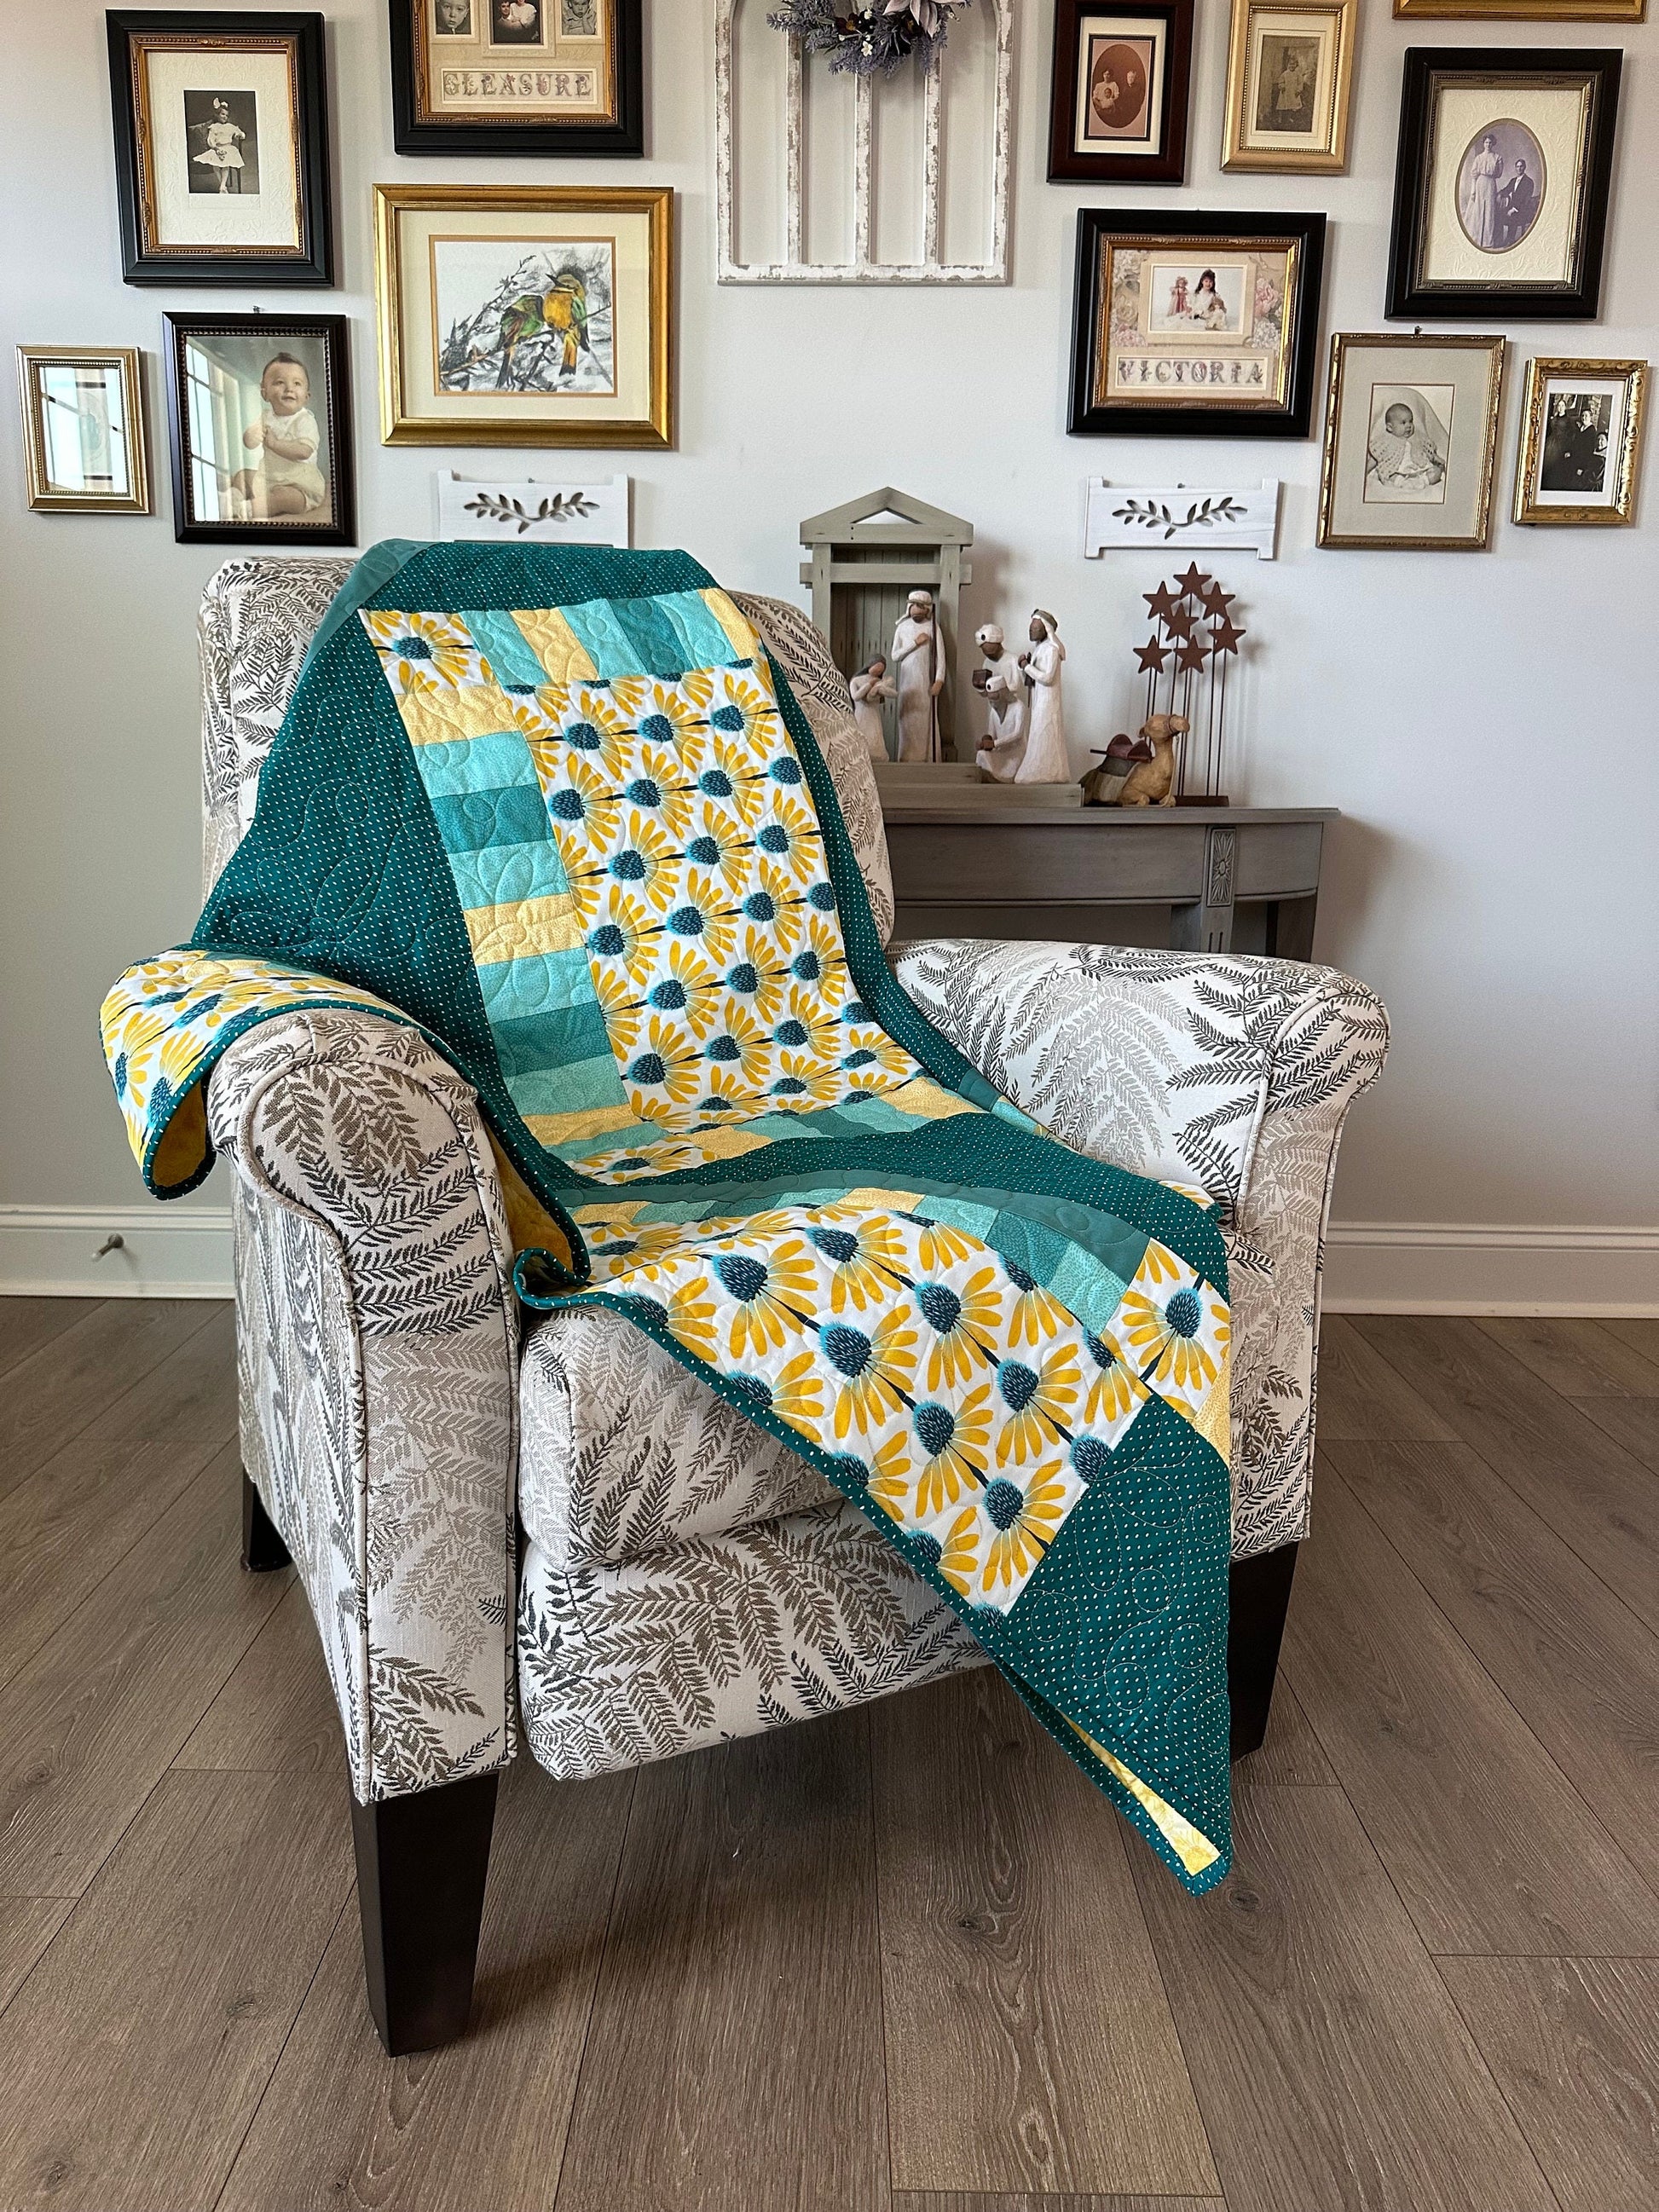 Yellow Echinacea Flower With Teal Polka Dots, Lap Quilt